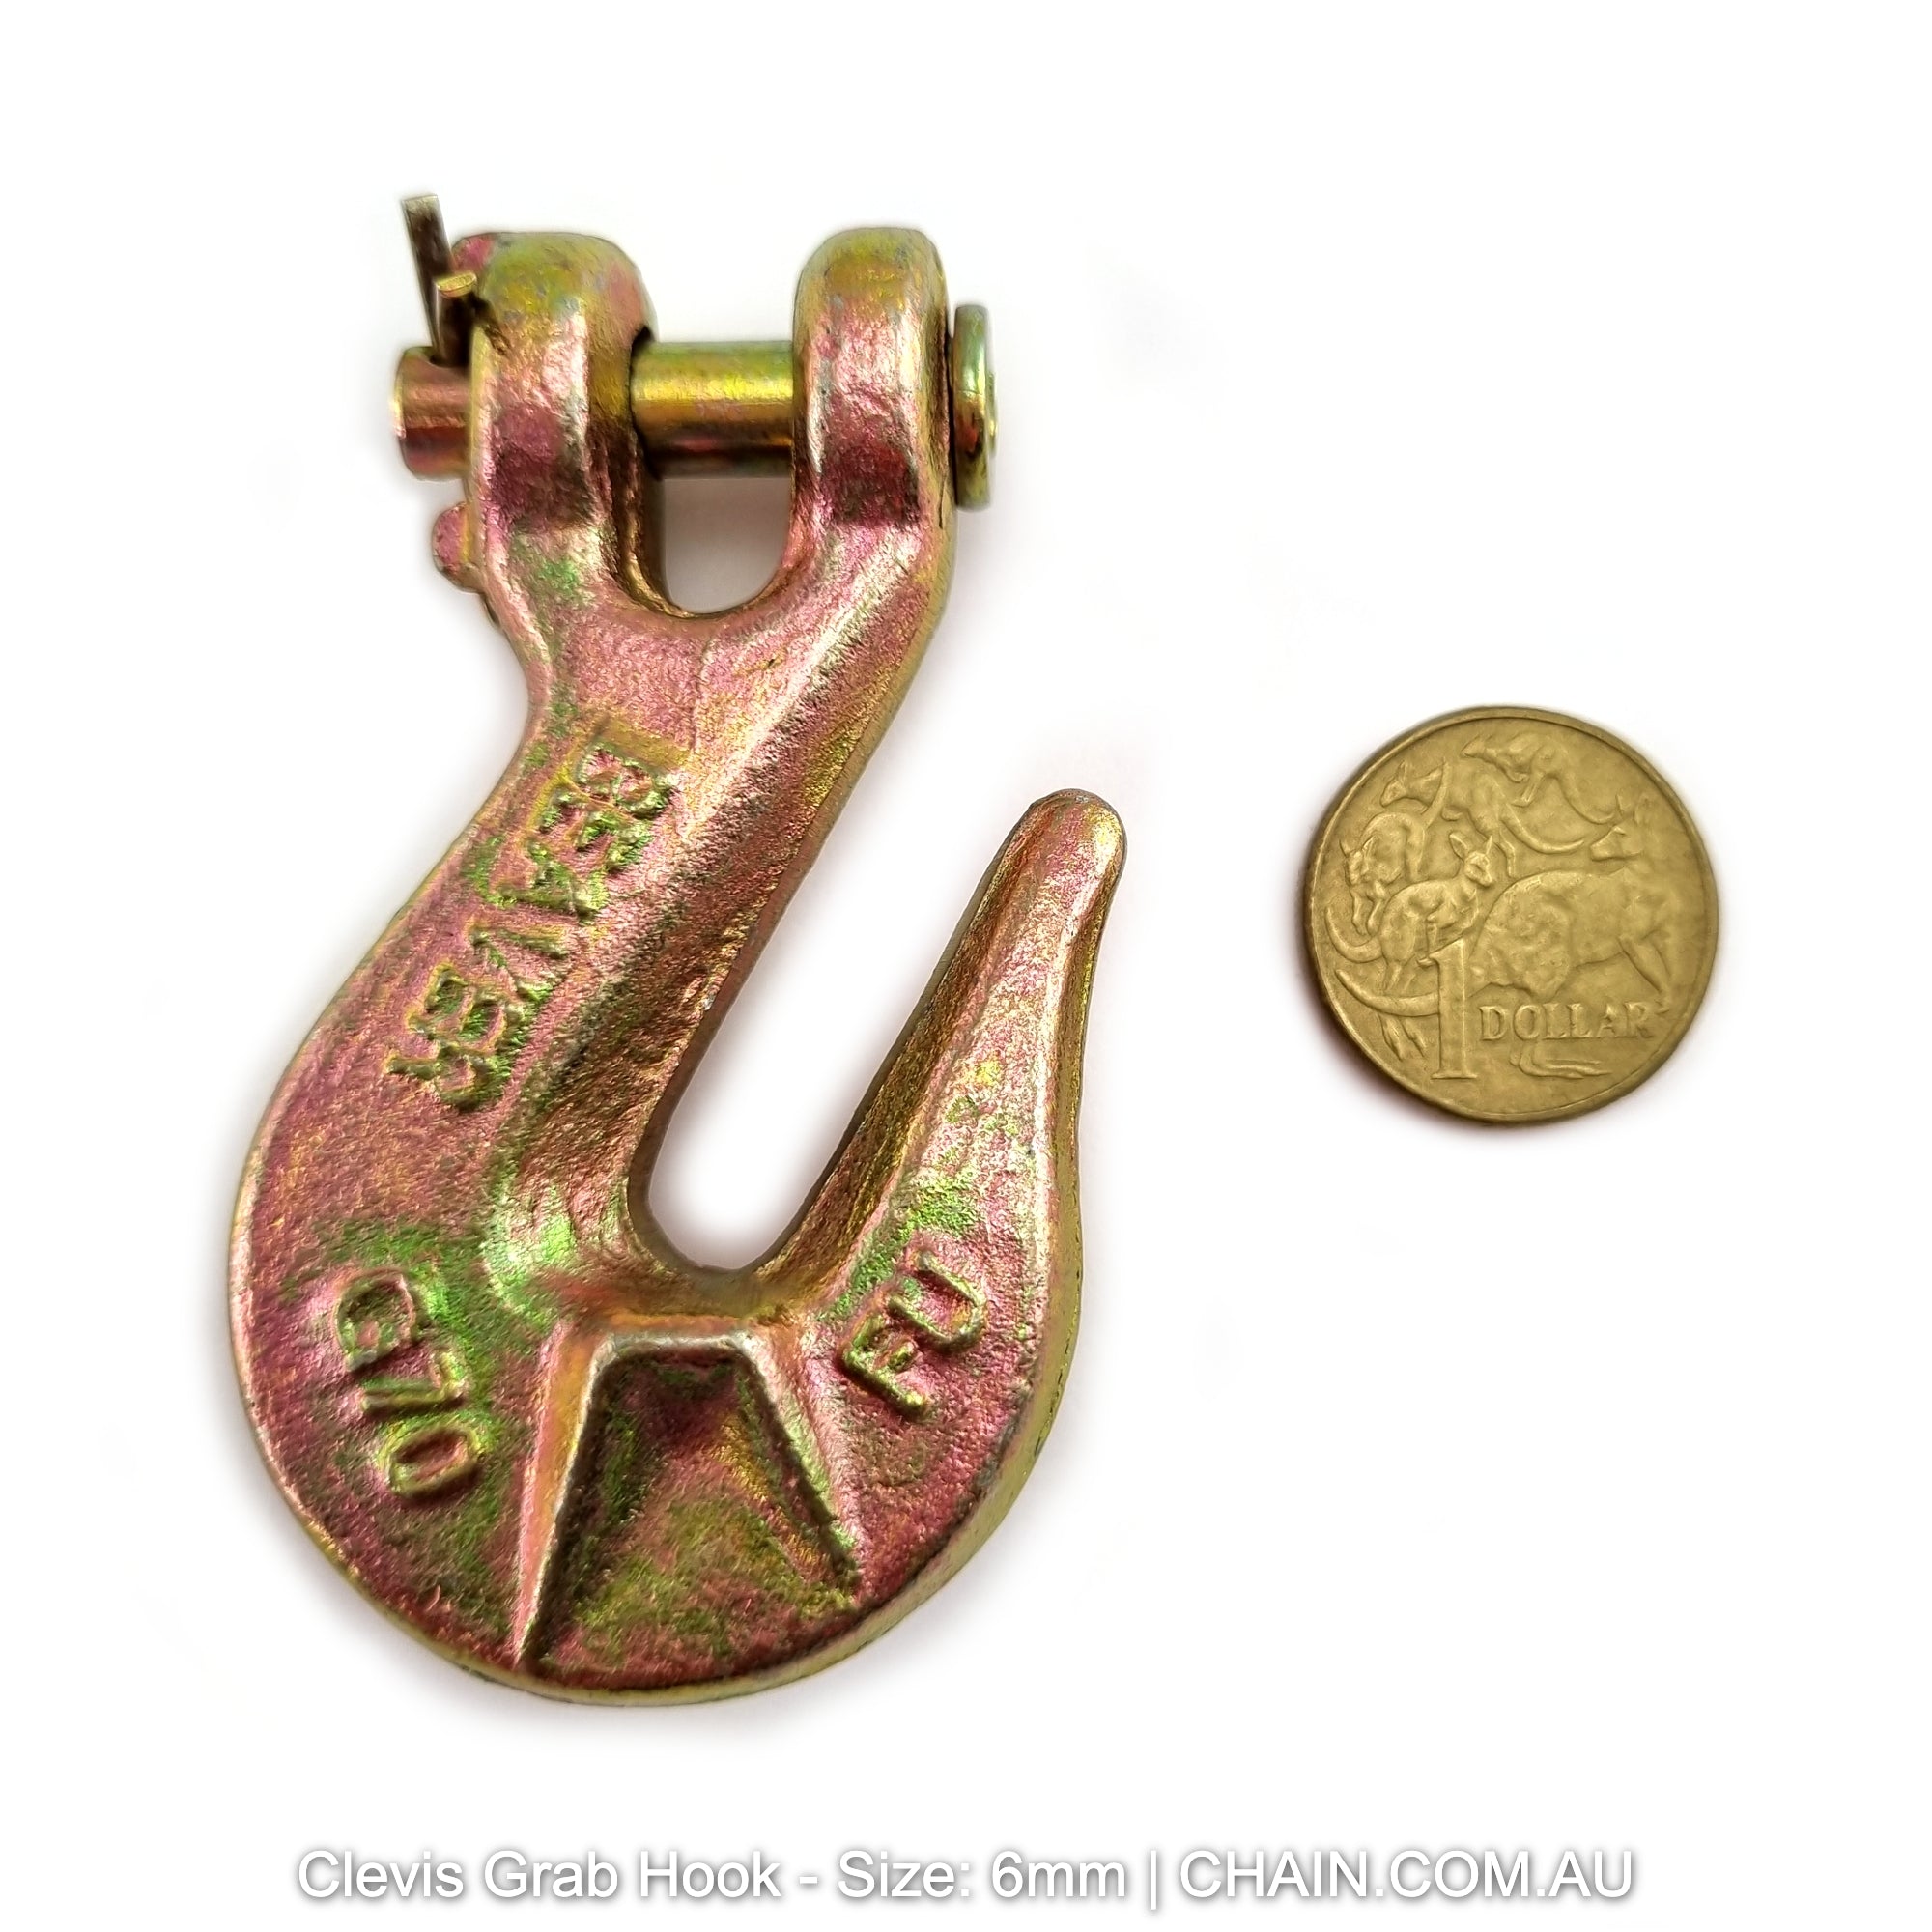 Clevis Grab Hook forged steel with a zinc passivated finish. Size: 6mm. Australia shipping. Shop lifting, rigging and load restraint products online at chain.com.au